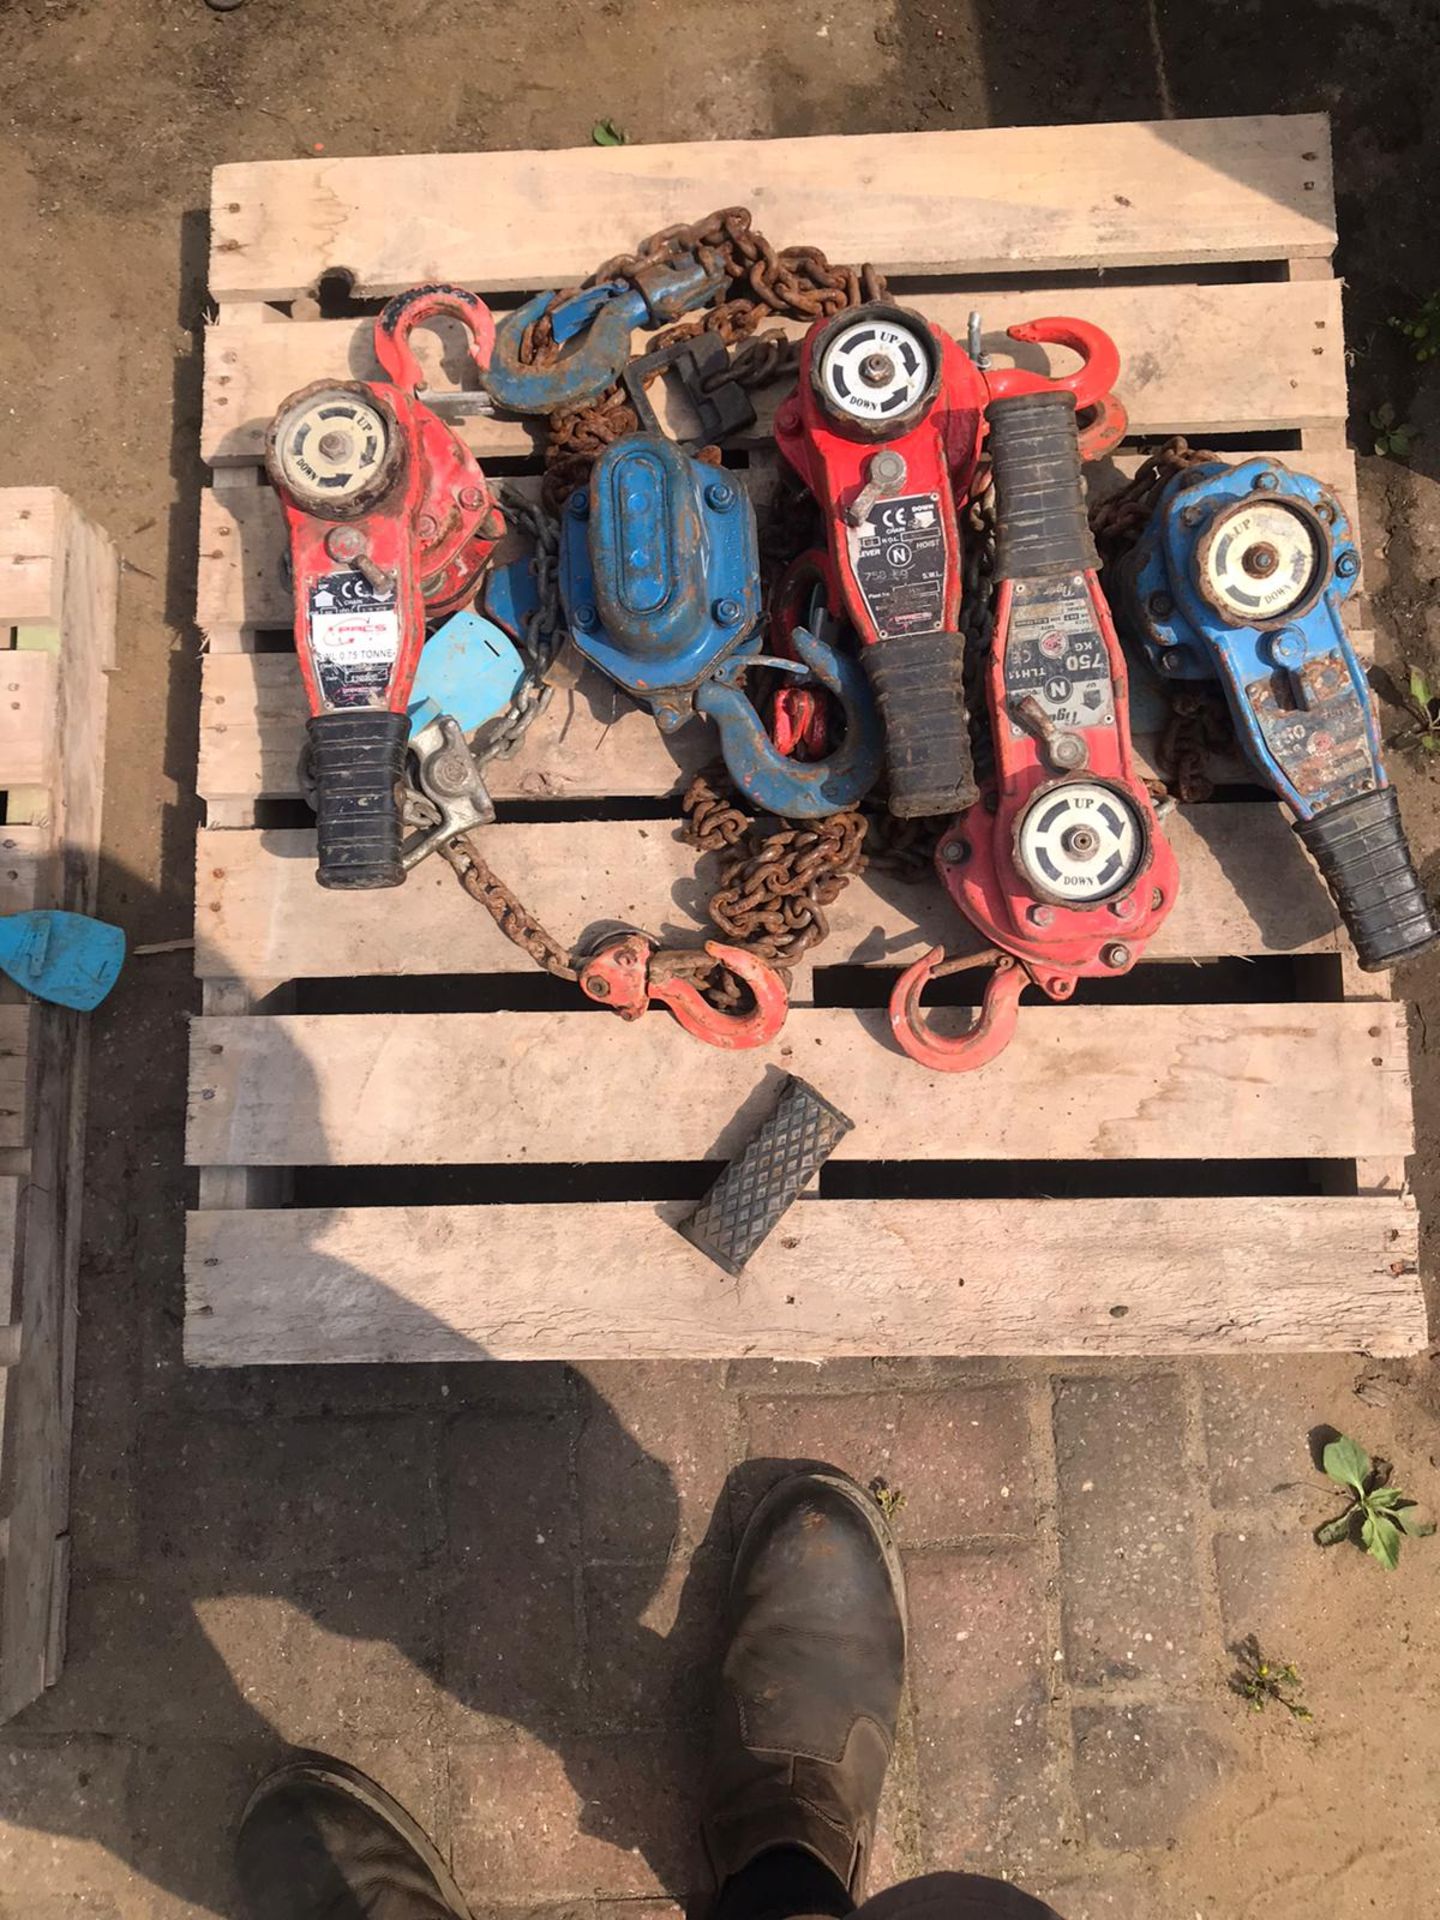 Pallet containing 5x block & chain Pulleys